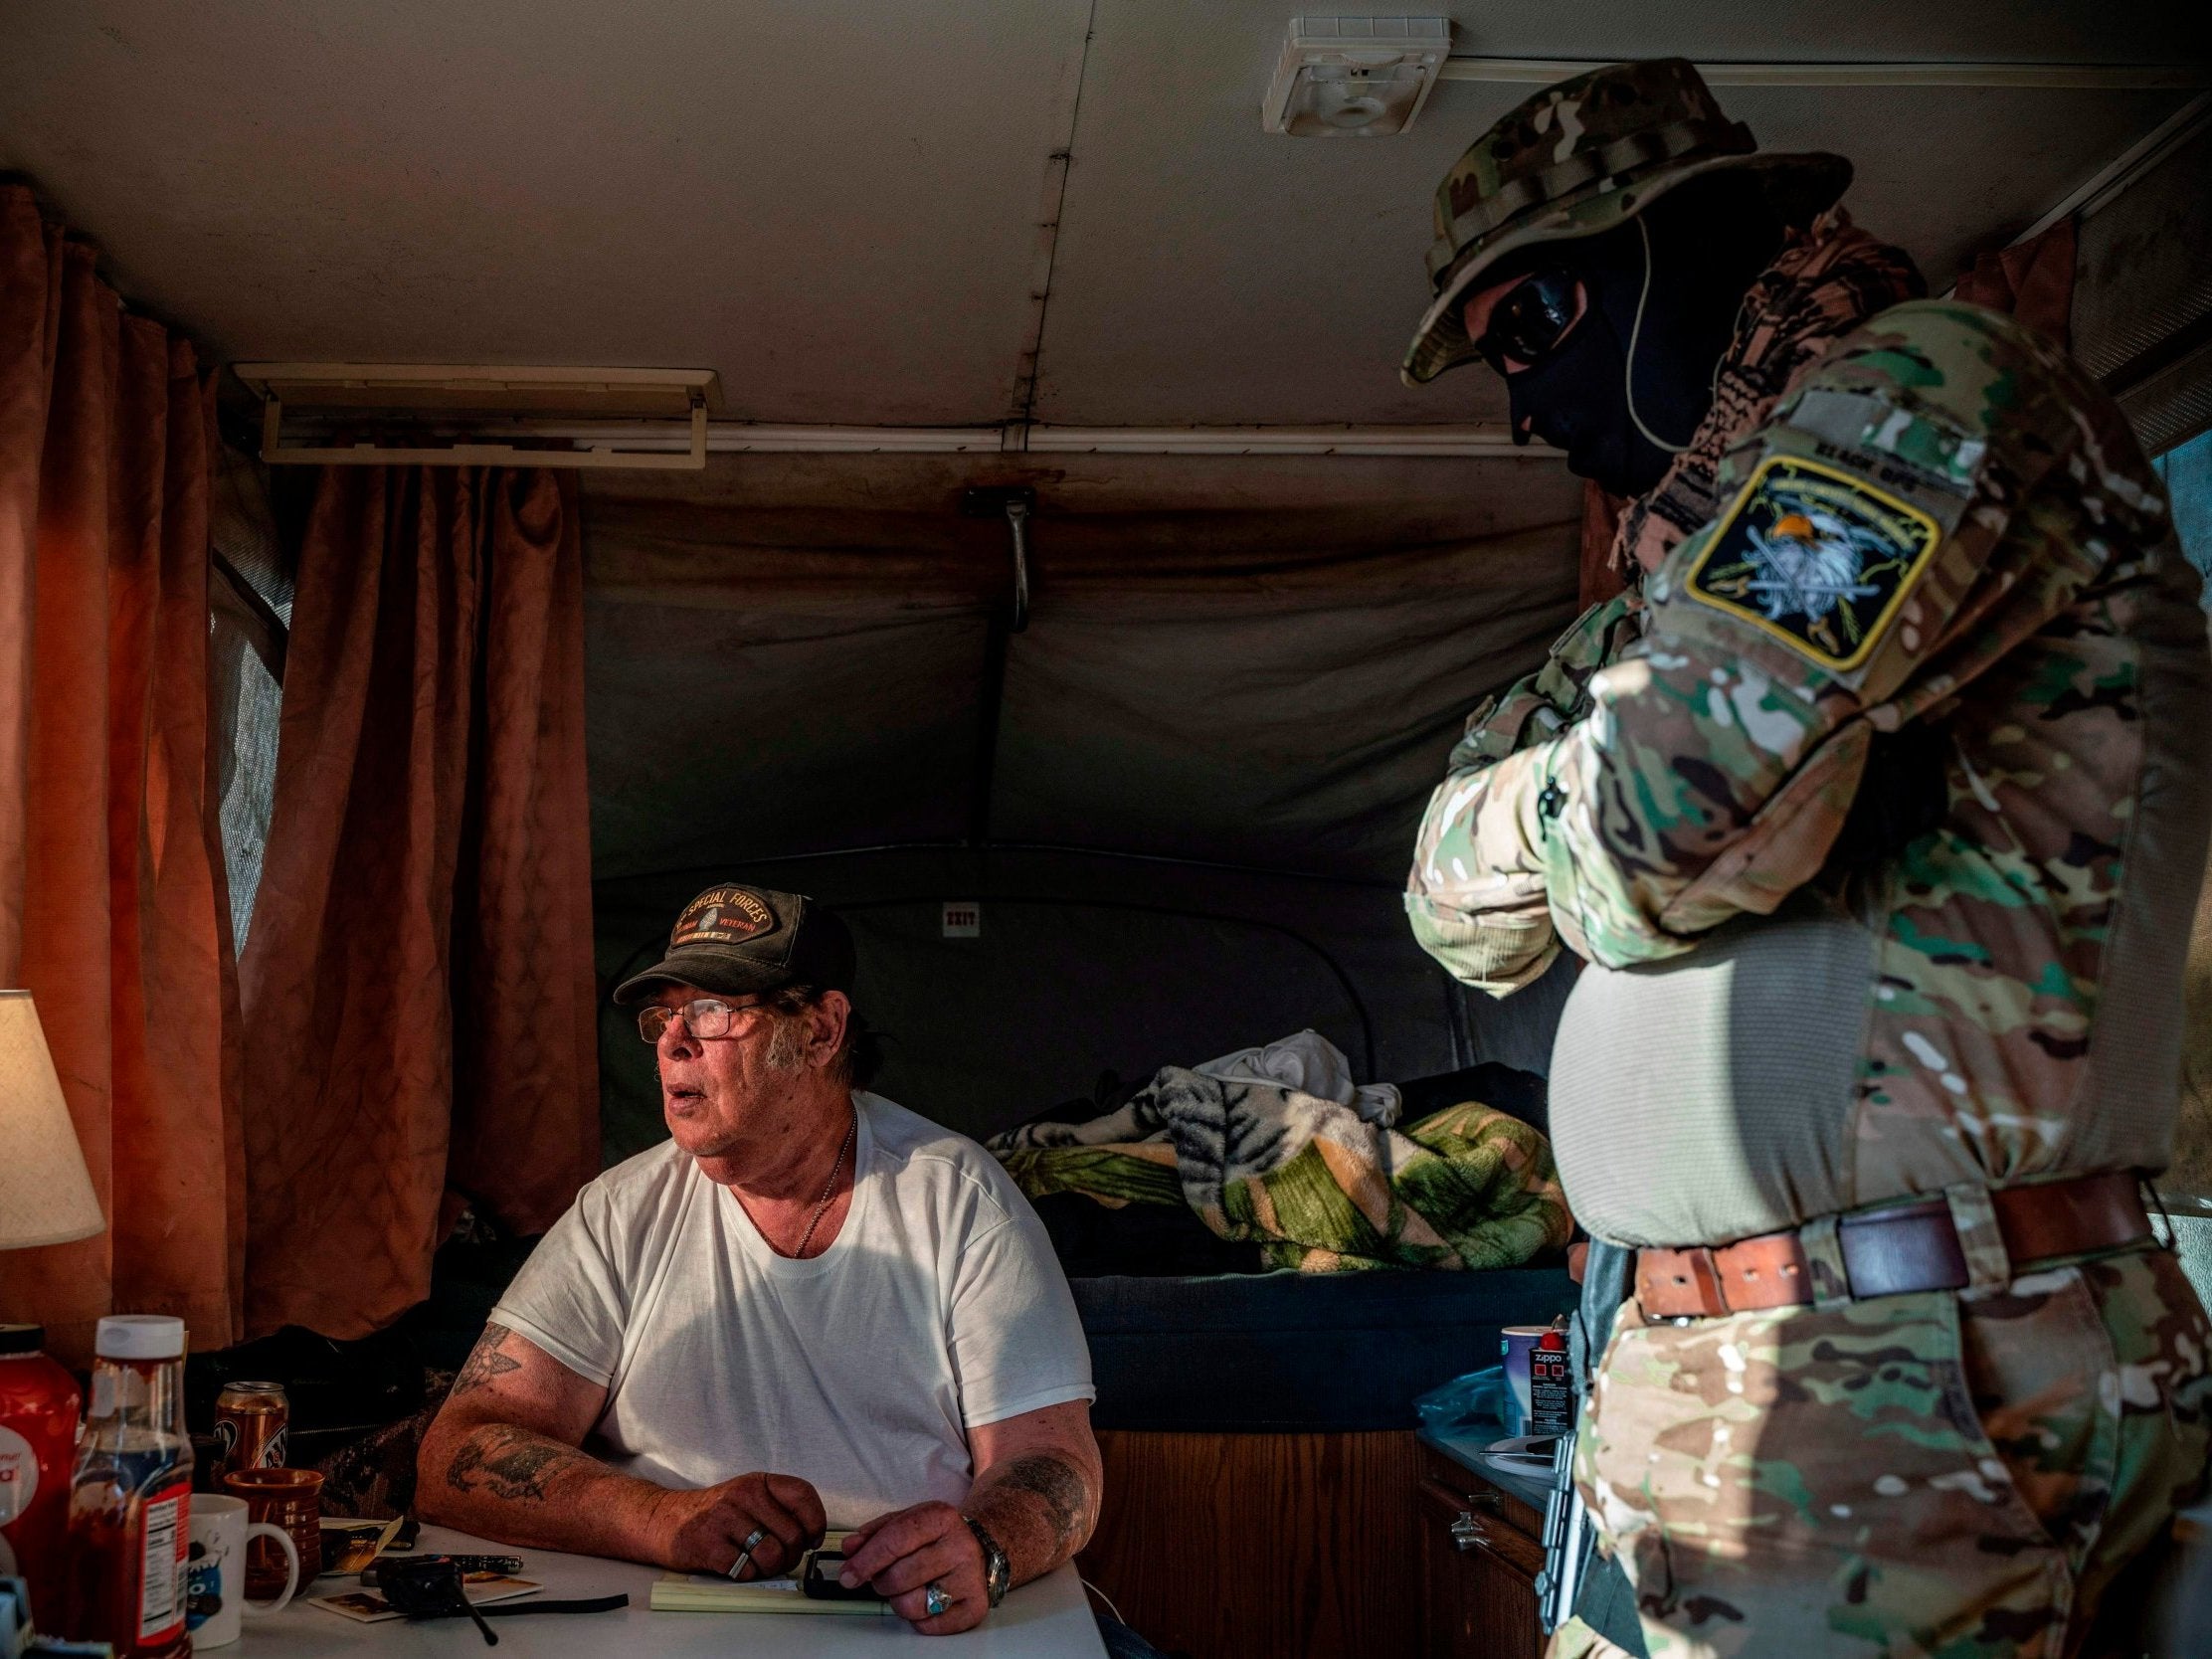 Striker, leader of the United Constitutional Patriots, speaks with Viper (R) while discussing logistics on a group chat near the US-Mexico border in Anapra, New Mexico on 20 March 2019.